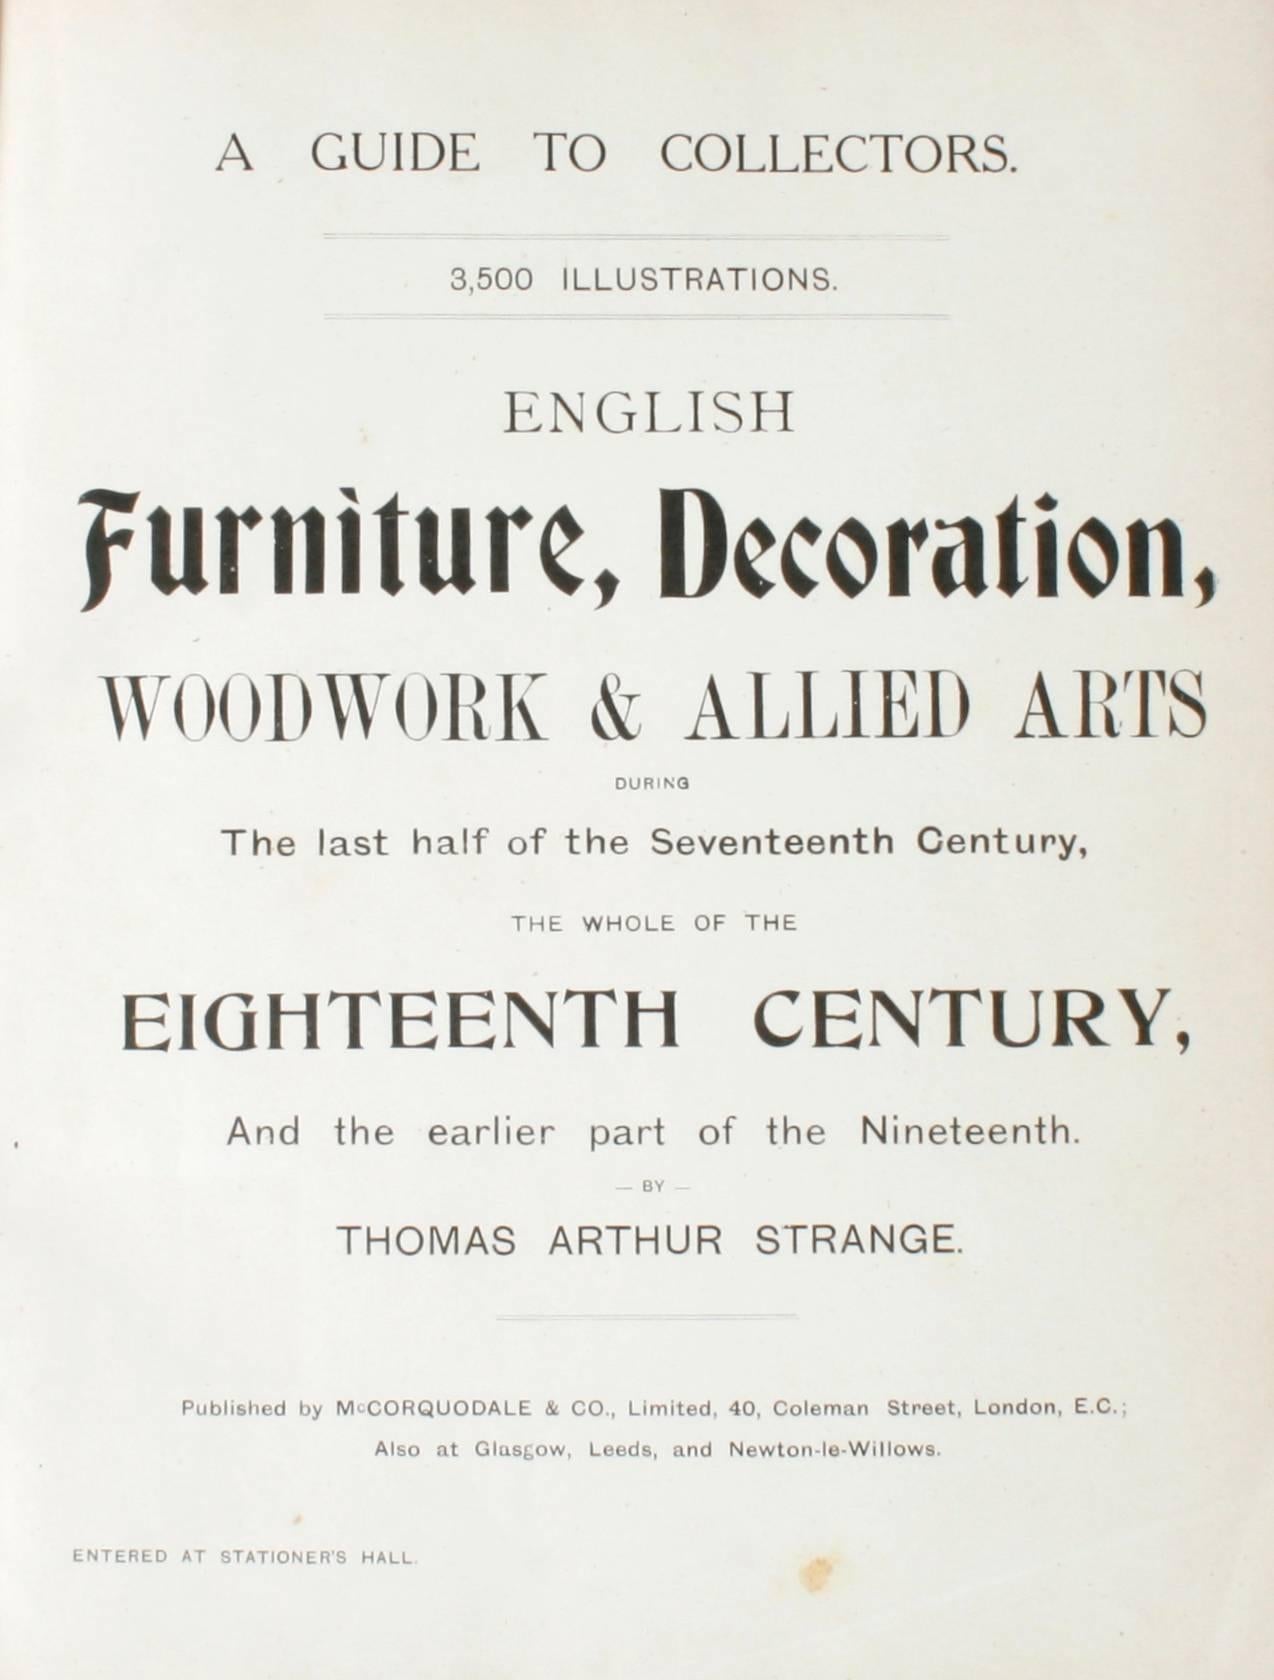 English Furniture, Woodwork, Decoration, During the 18th c, and the Earlier Part of the 19th c by Thomas Arthur Strange. London: McCorquodale and Co., 1890. First edition hardcover with no dust jacket as issued. 368 pp. A beautiful antique book with